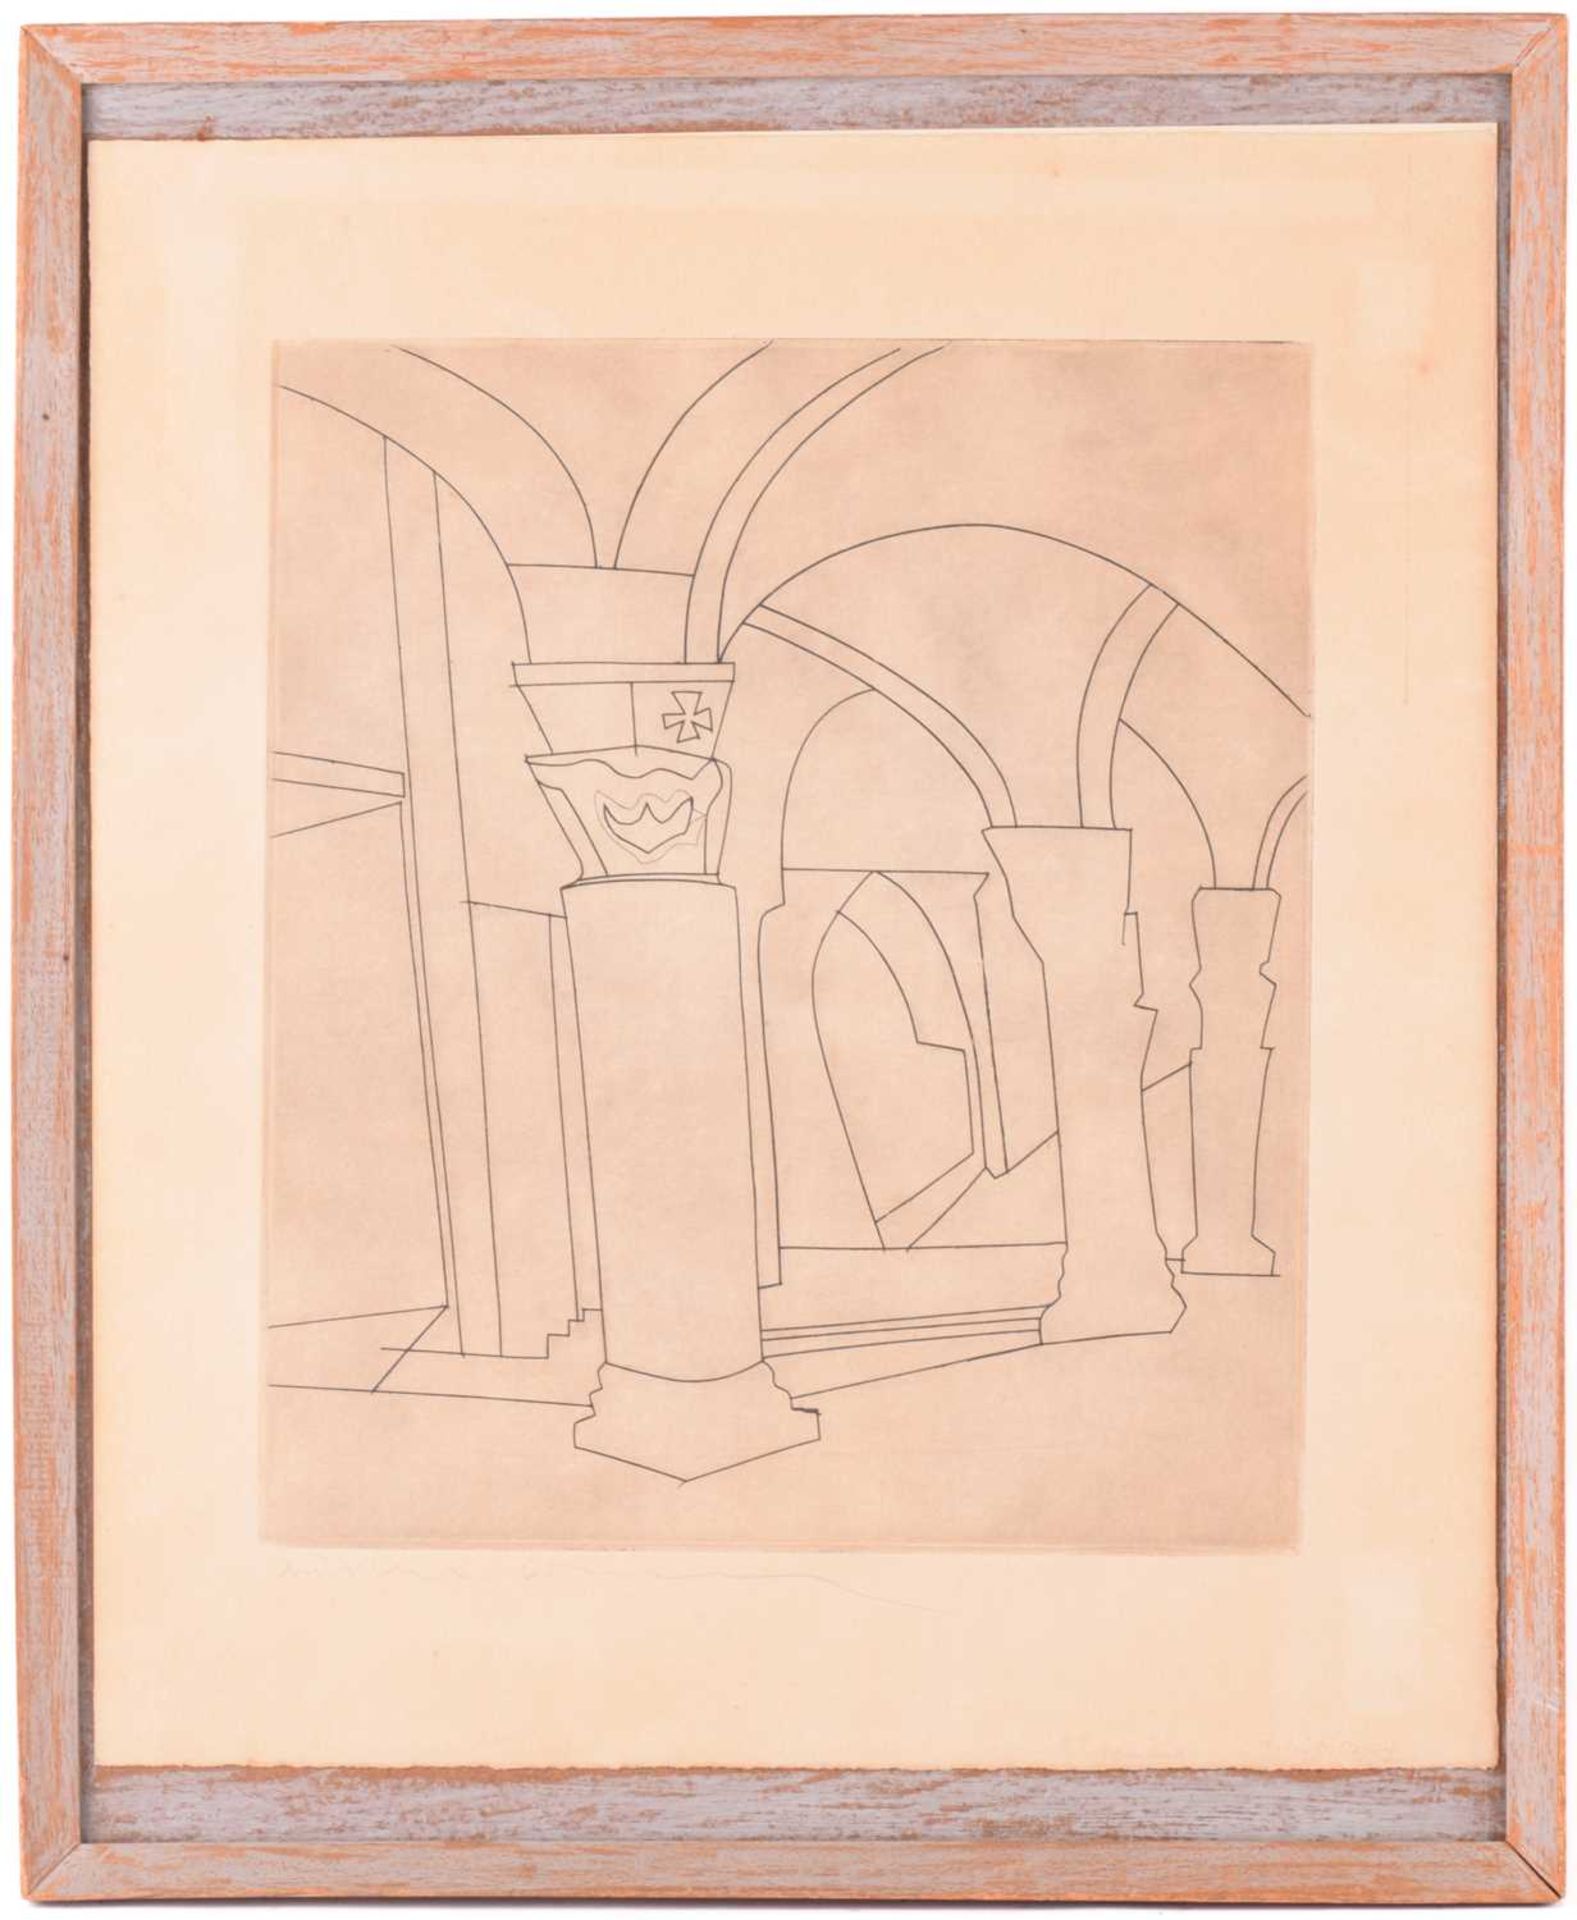 Ben Nicholson (1894 - 1982), Aquileia, signed and dated 65 in pencil, titled and inscribed - Image 2 of 13